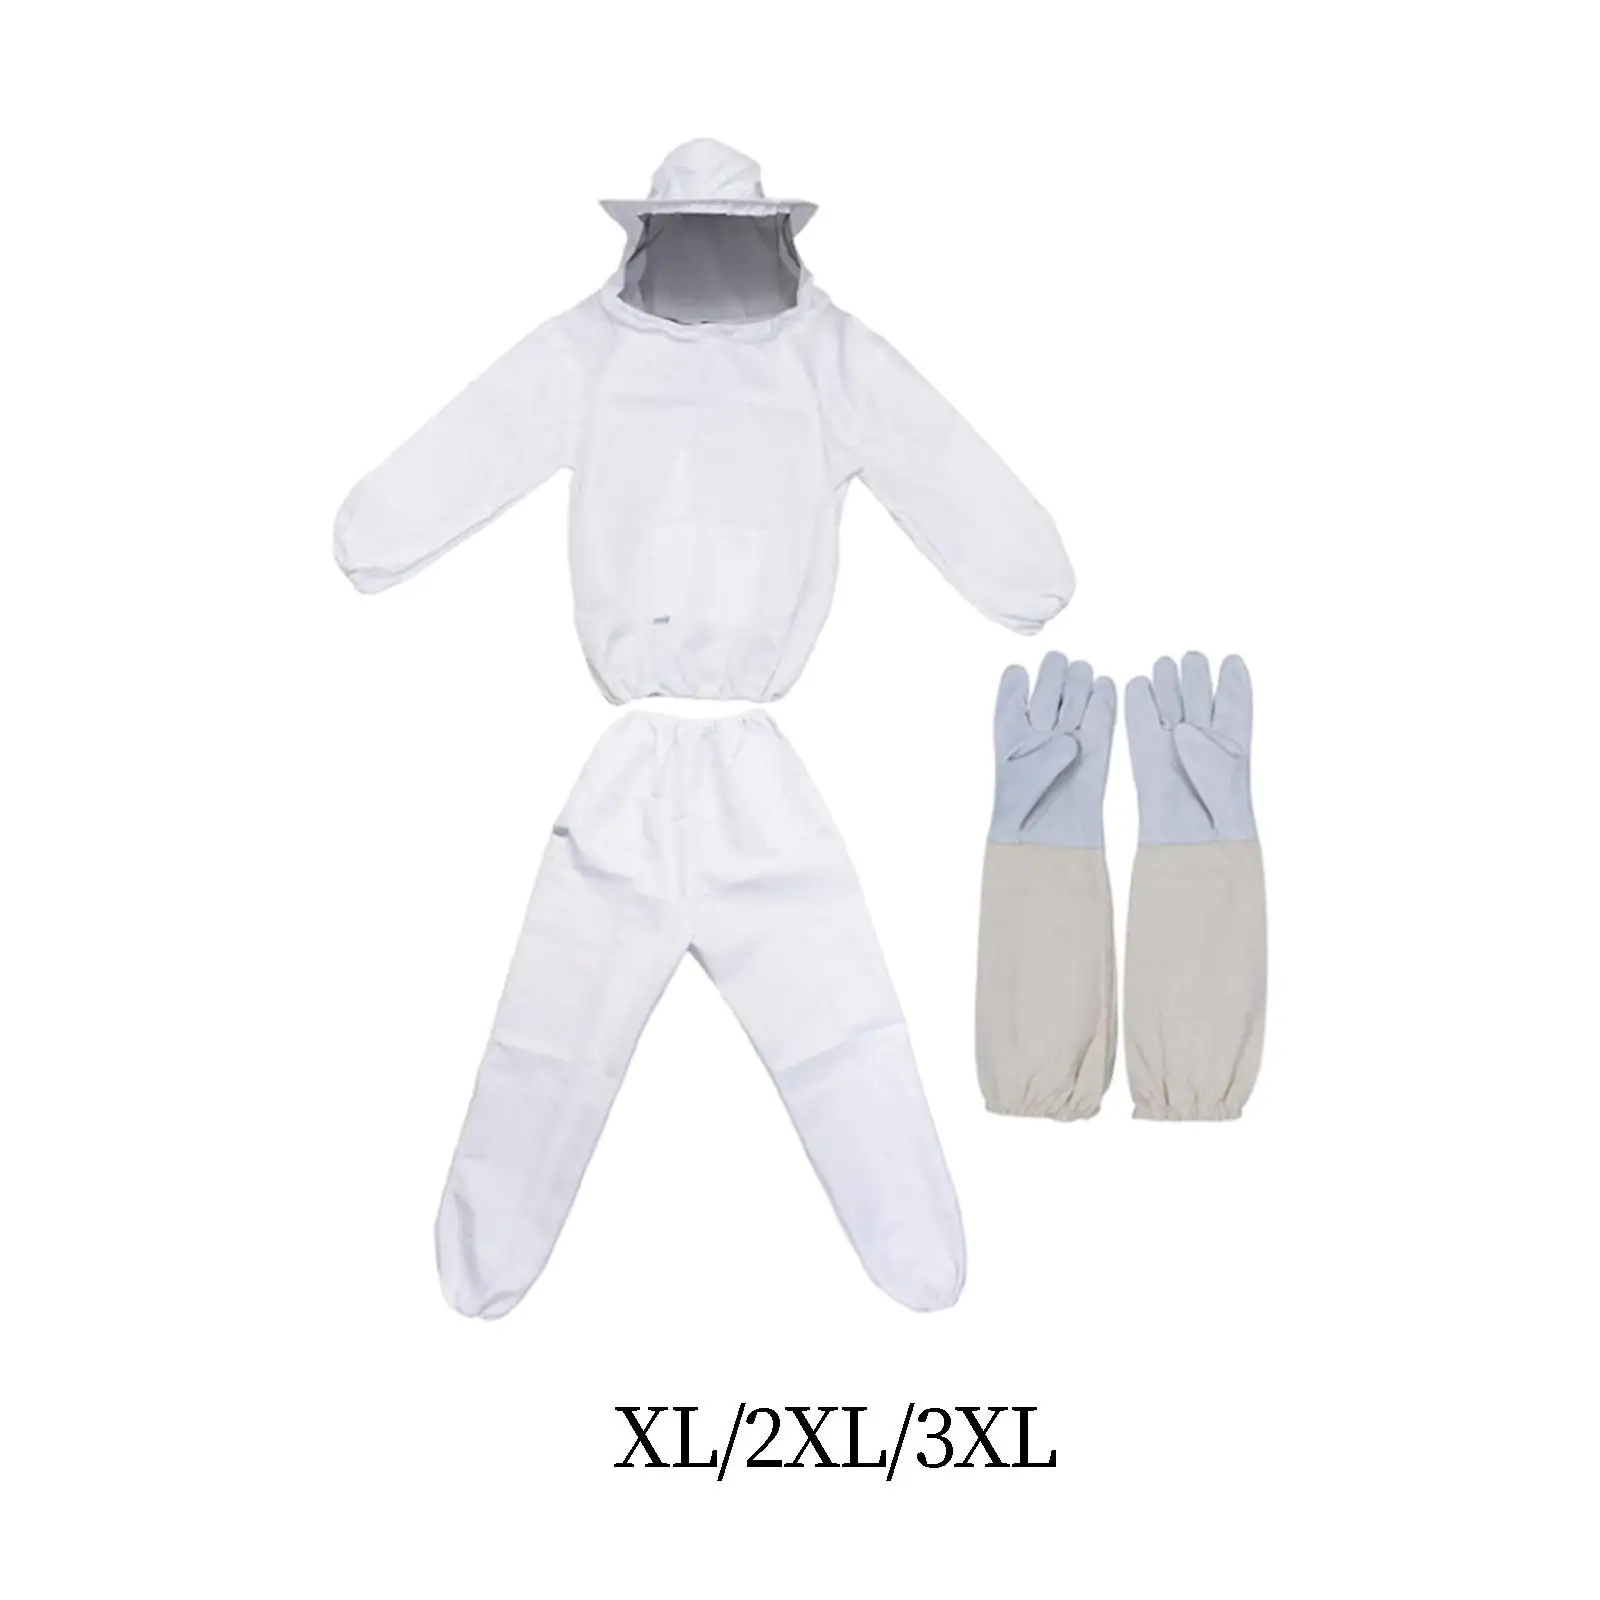 

Bee Outfit with Glove Professional Bee Suit for Men Women Full Body Beekeeping Clothes Beekeeper Costume Bee Keepers Suit